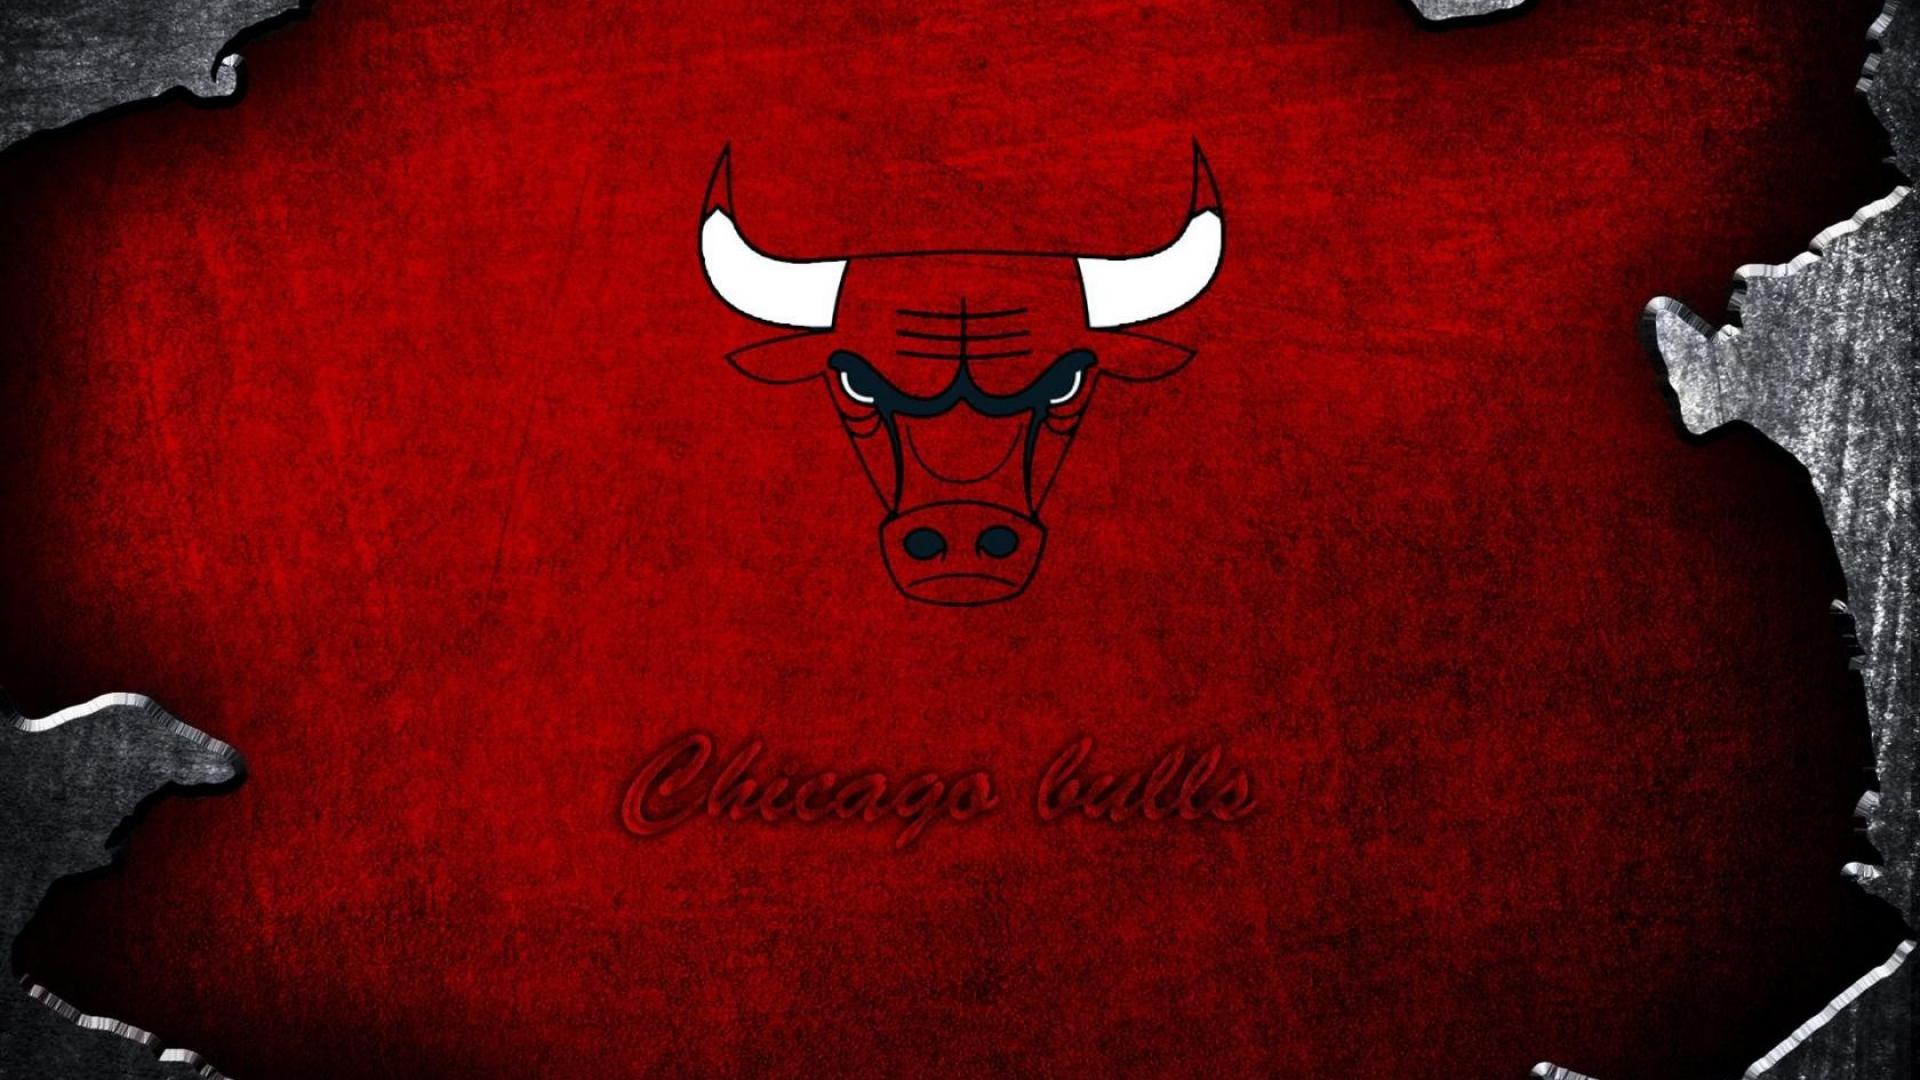 Abstract Bull Wallpapers